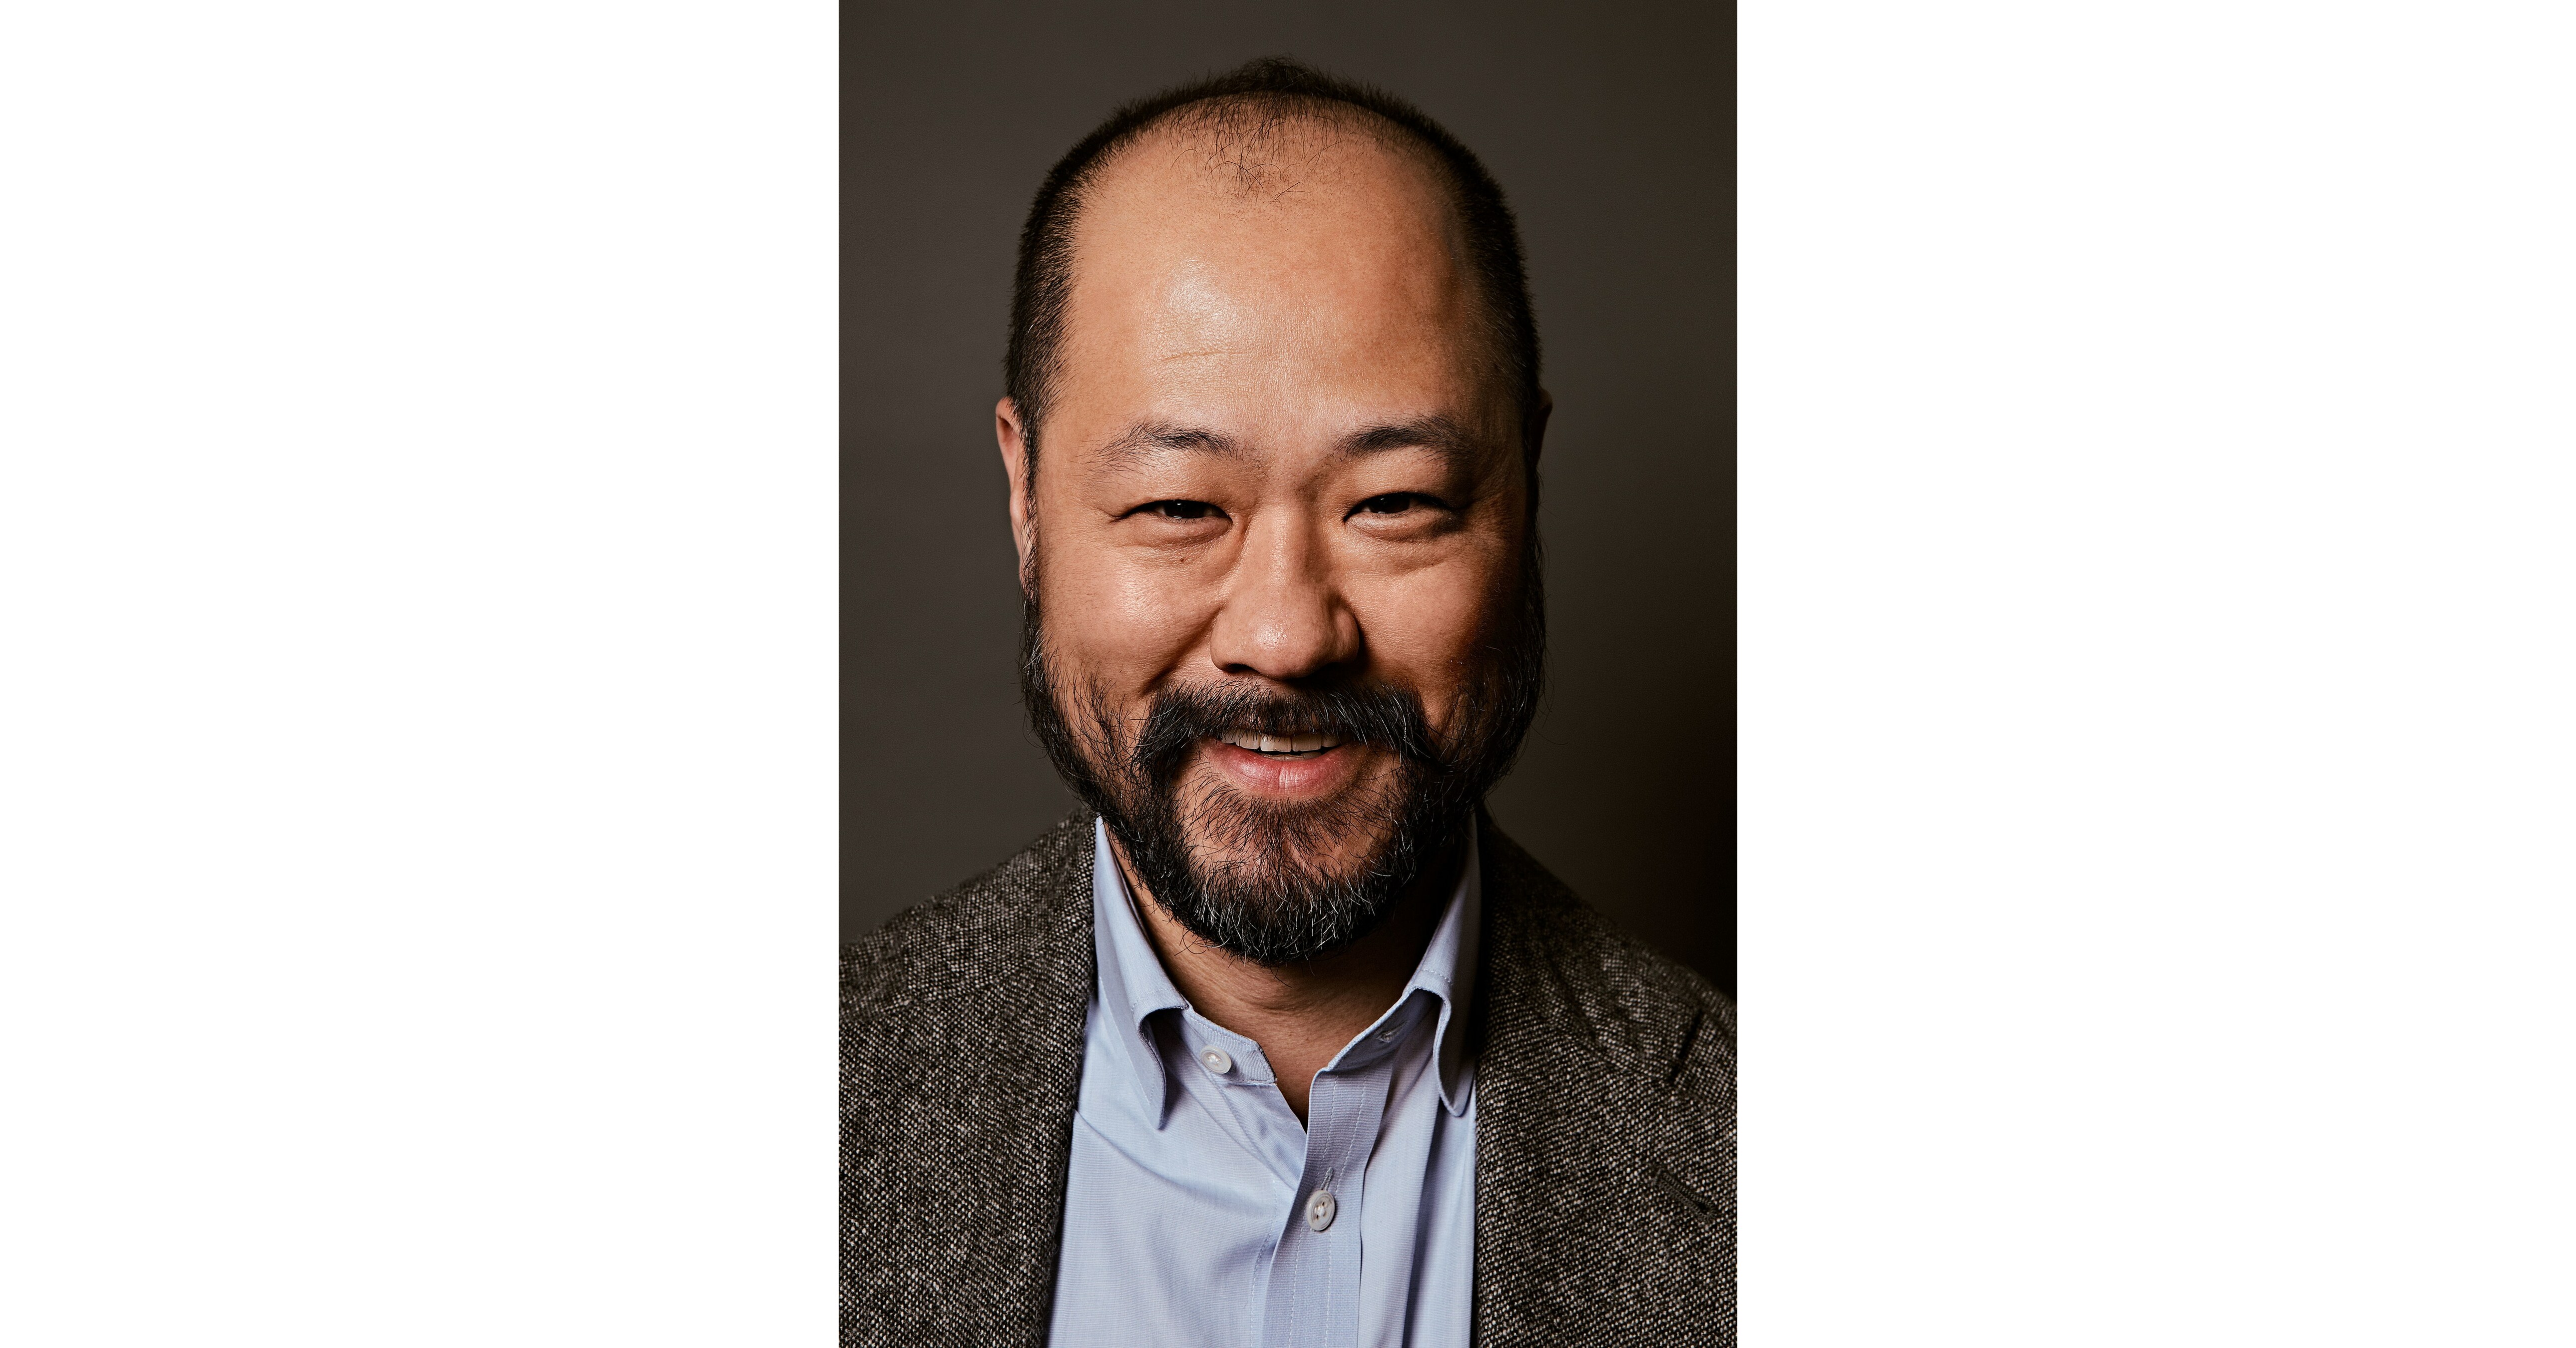 Global SaaS Leader Zone & Co appoints experienced FinTech Exec Thomas Kim as new CEO